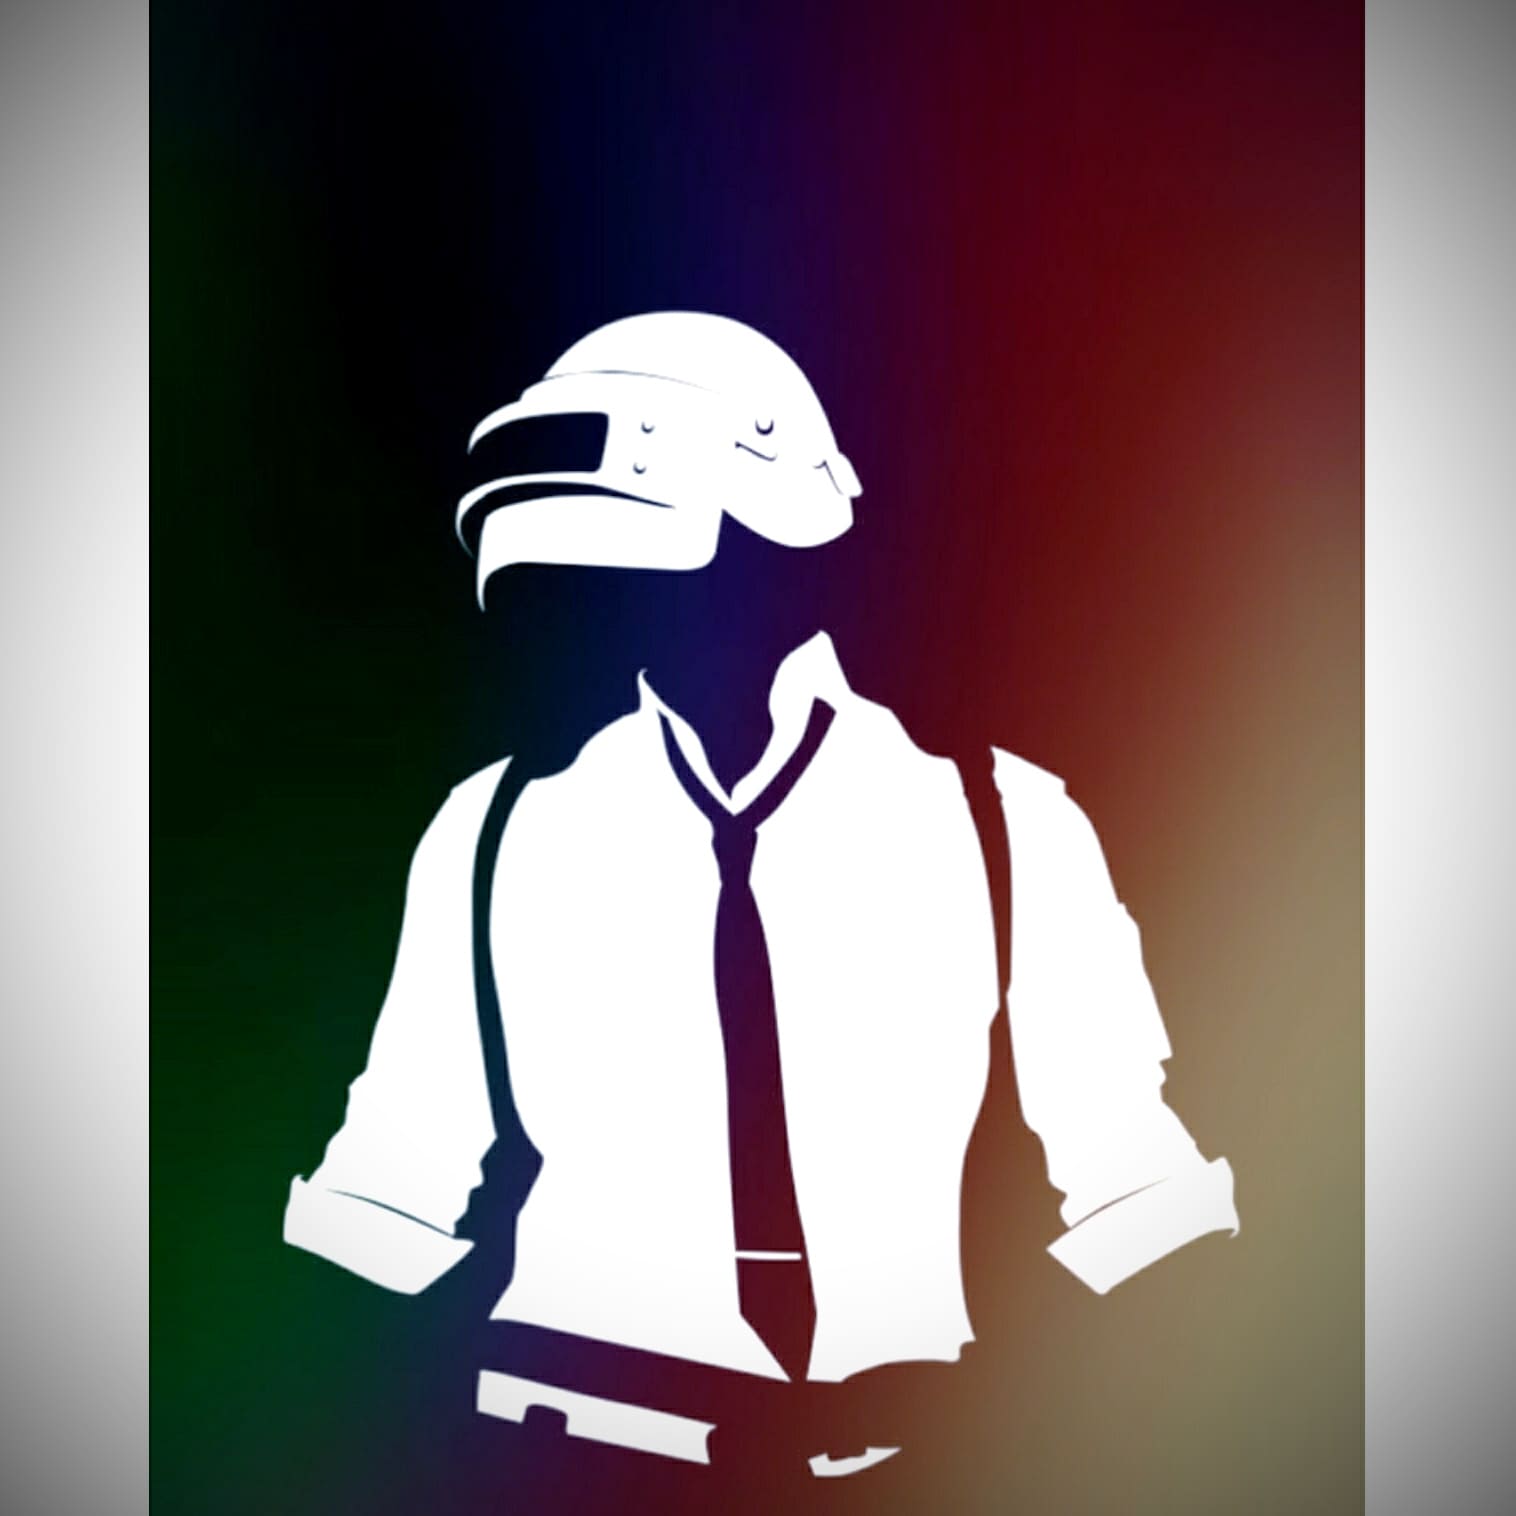 Pubg Wallpaper Hd 4k Android Download For Mobile